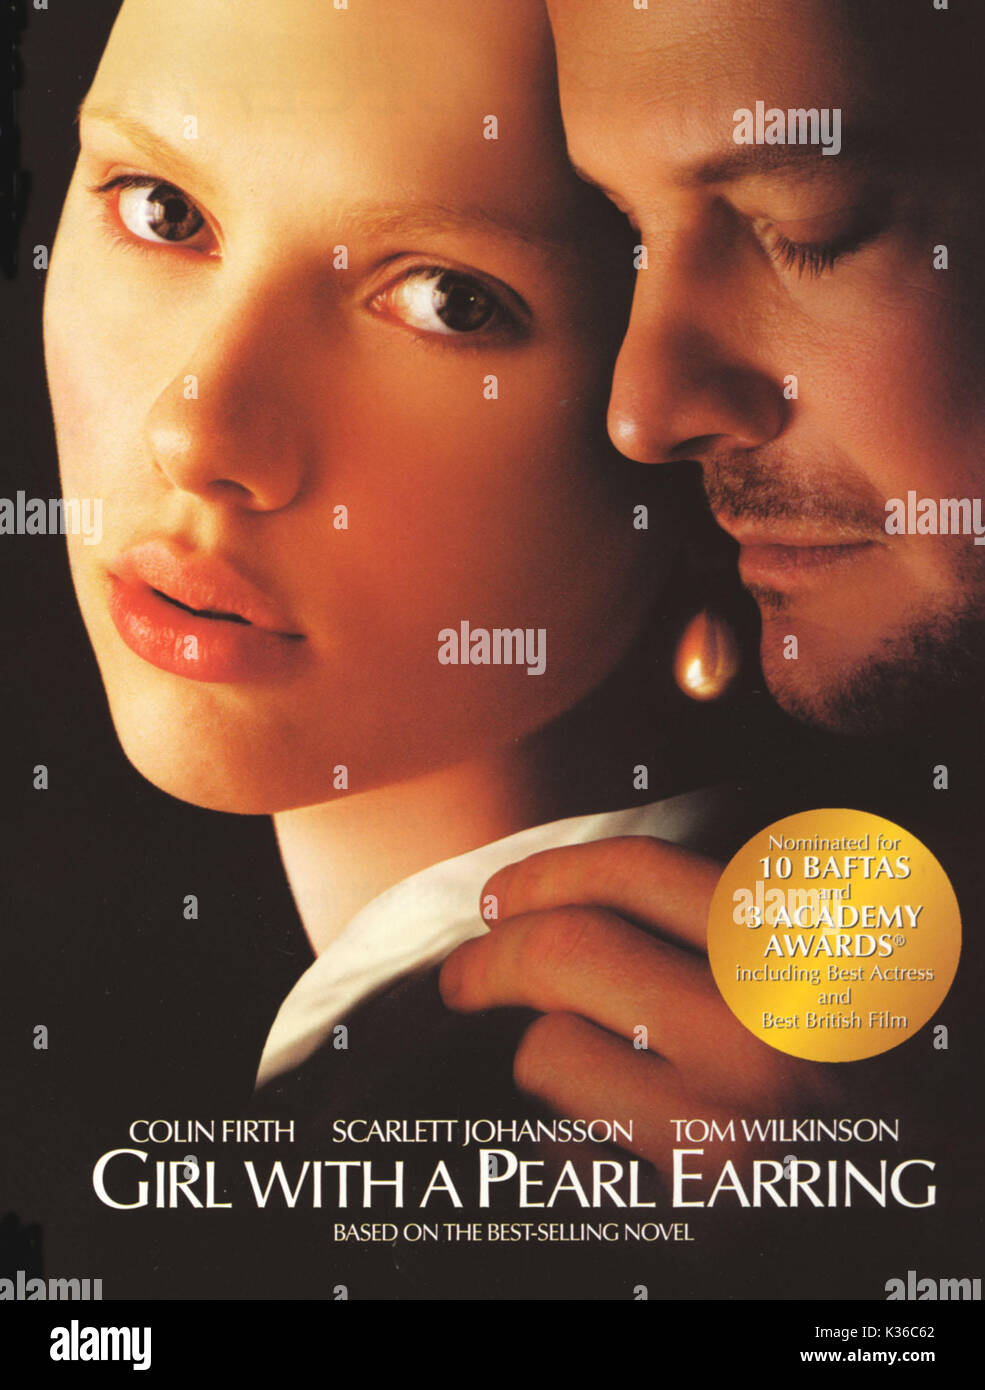 THE GIRL WITH A PEARL EARRING POSTER FROM THE RONALD GRANT ARCHIVE THE GIRL WITH A PEARL EARRING      Date: 2003 Stock Photo